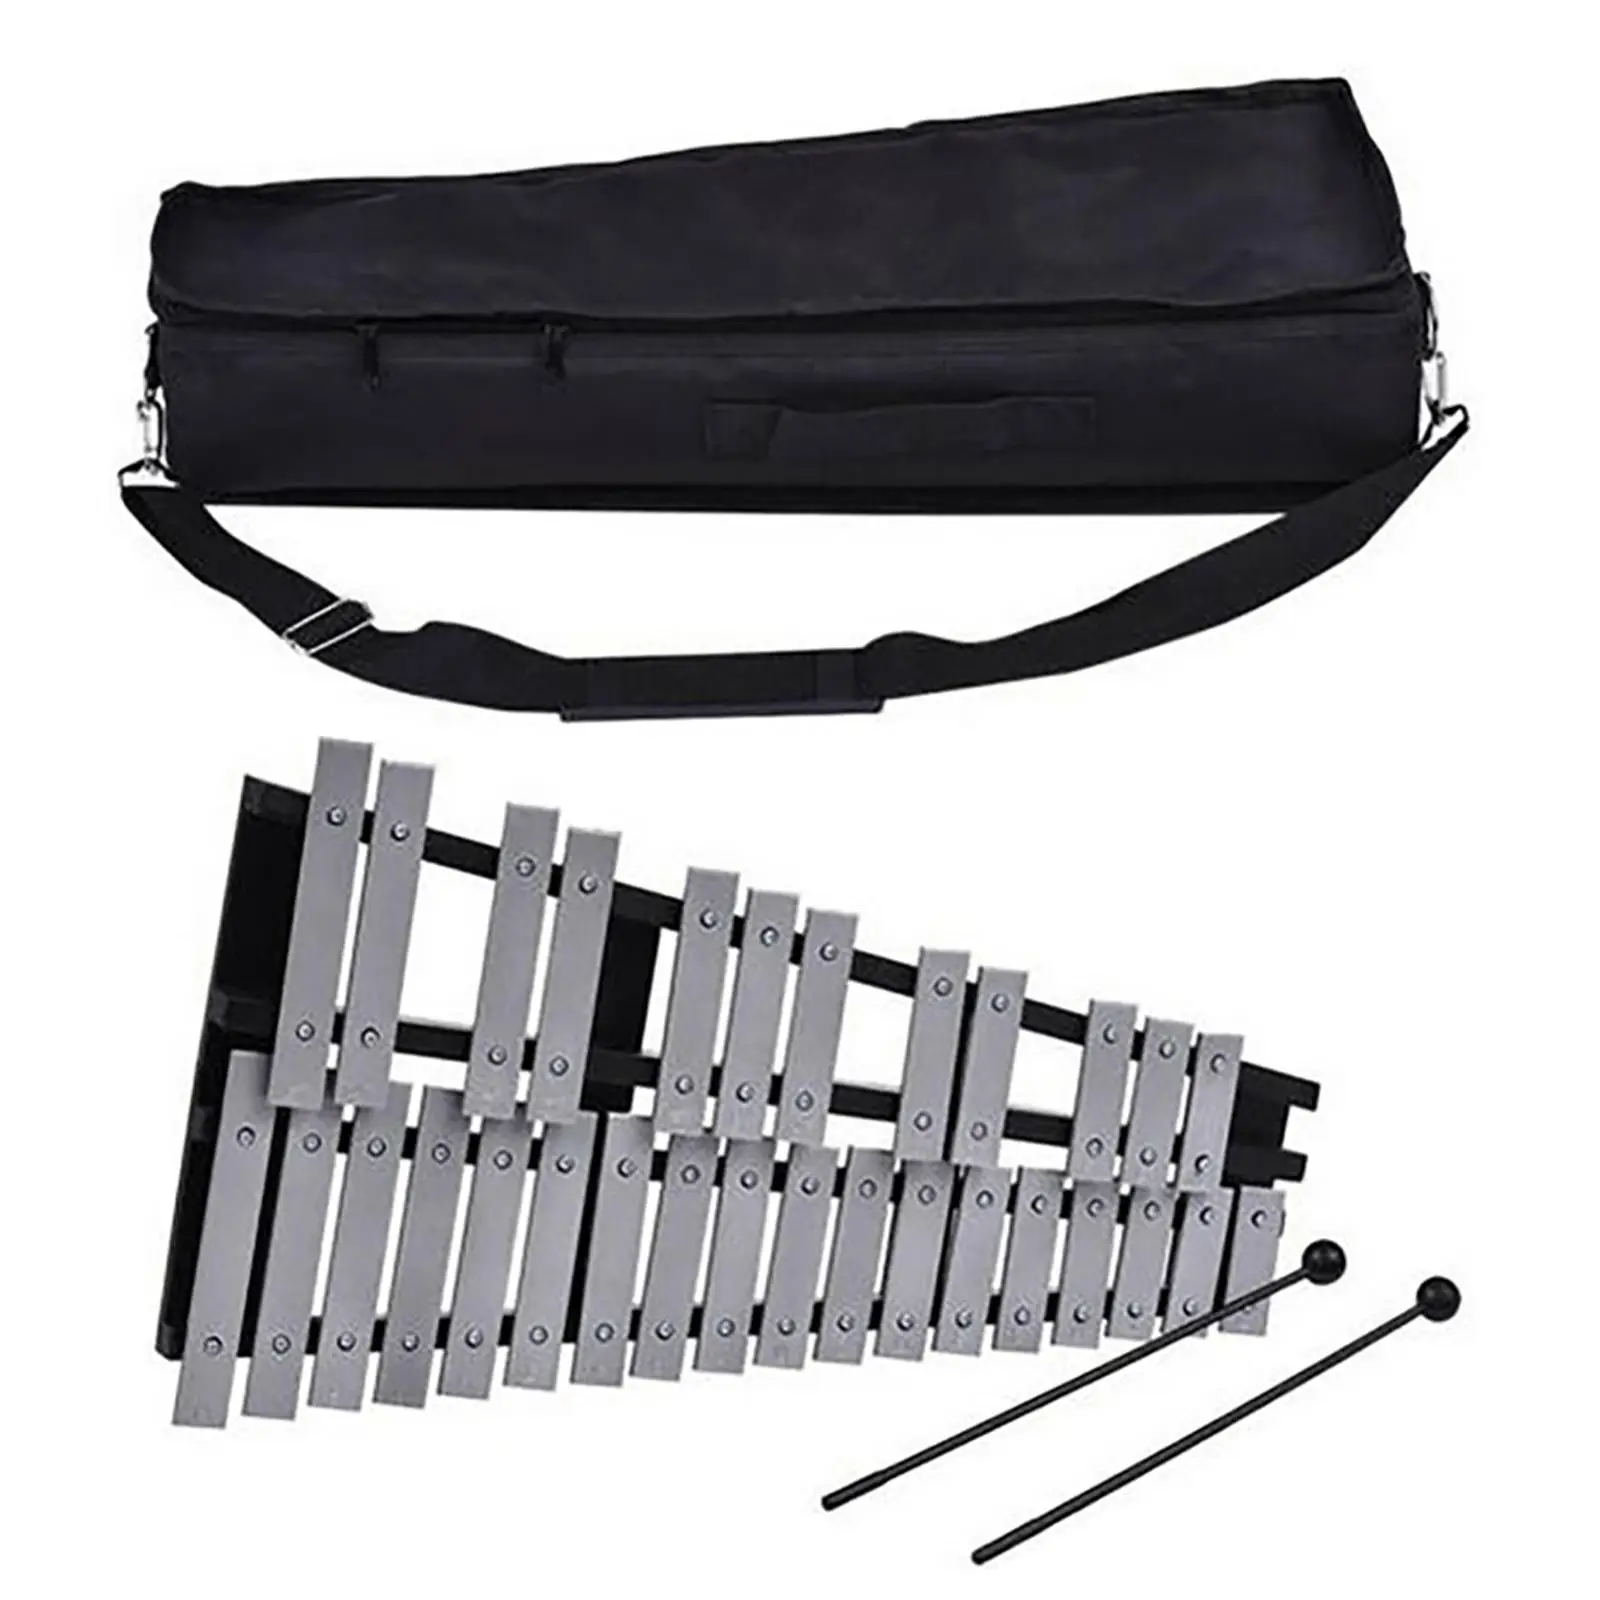 Metal 32 Note Glockenspiel Xylophone Bell Percussion Instrument Kit and Carrying Bag Includes 2 Mallets for Birthday Gift